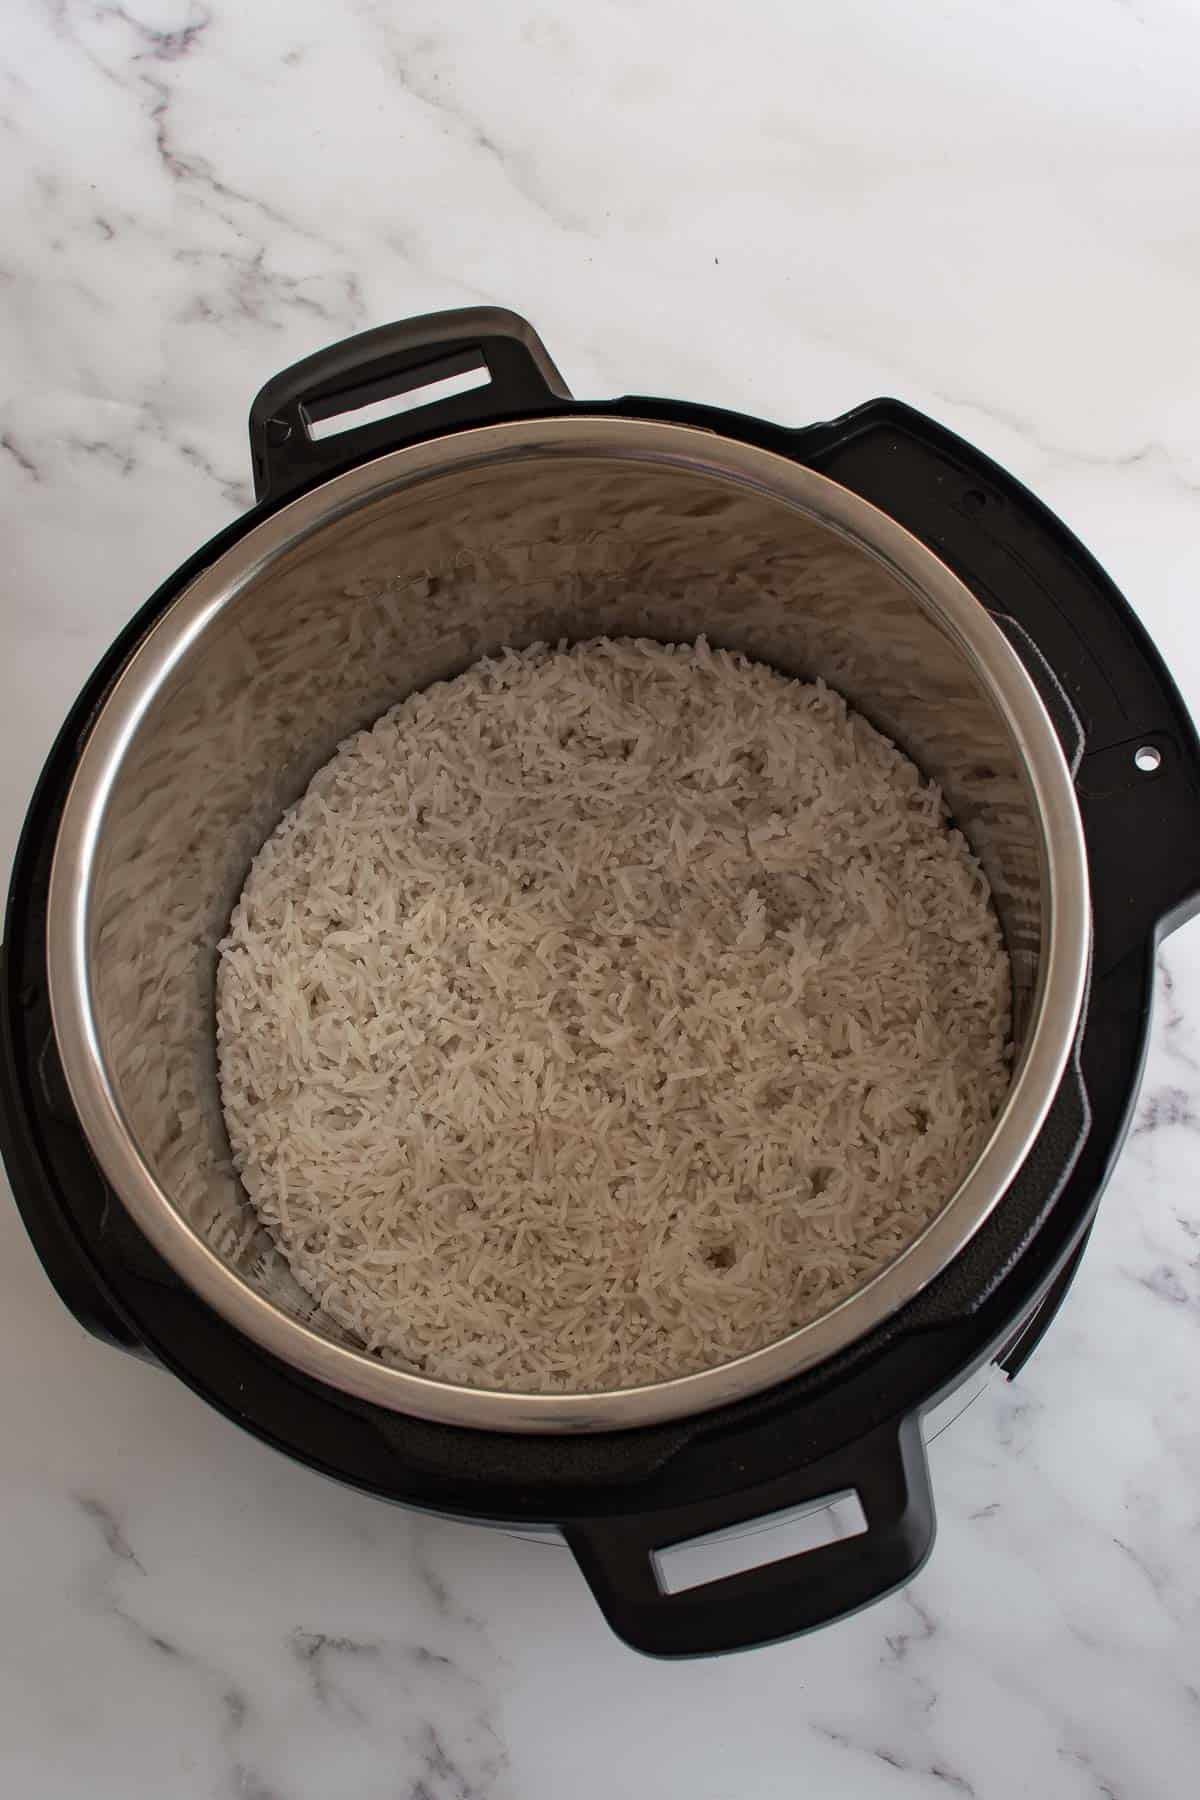 Cooked rice in an instant pot.